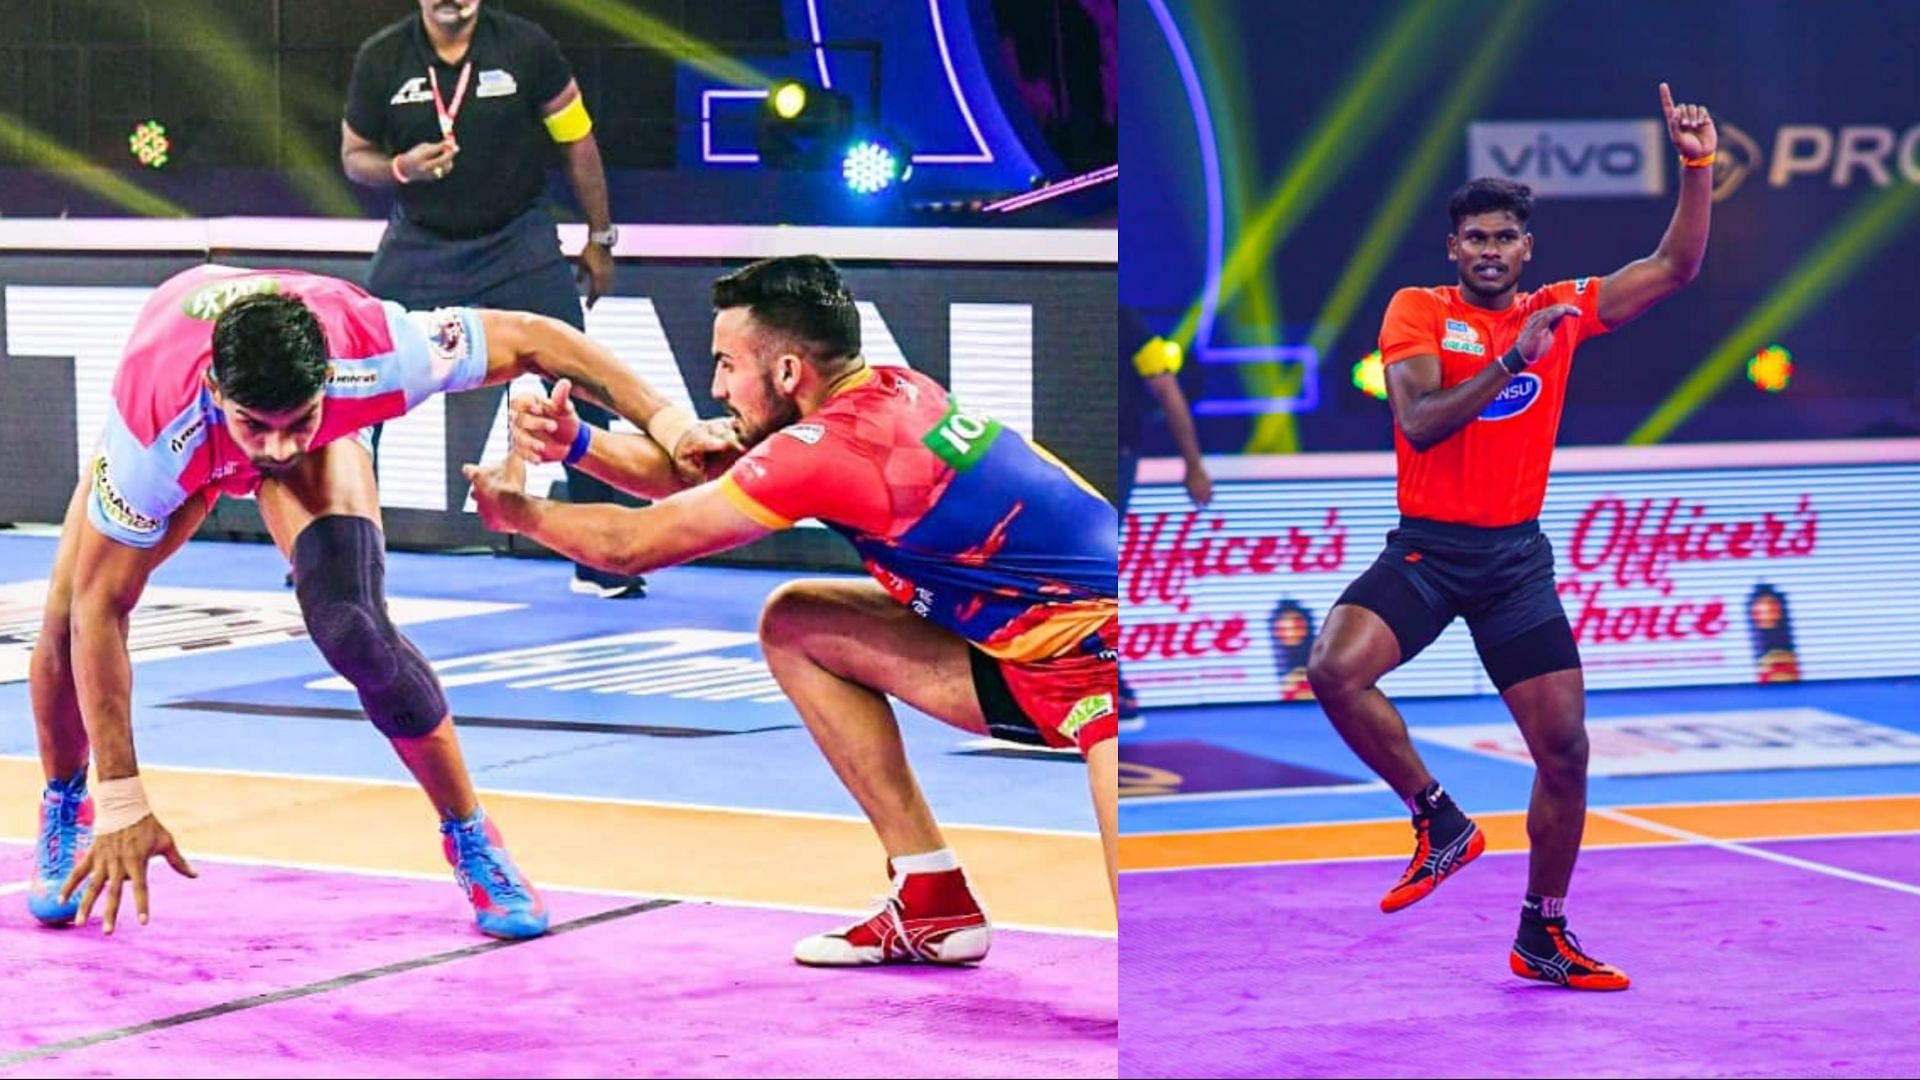 Fans enjoyed the two matches that took place earlier tonight in Pro Kabaddi 2021 (Image: Instagram/Pro Kabaddi)